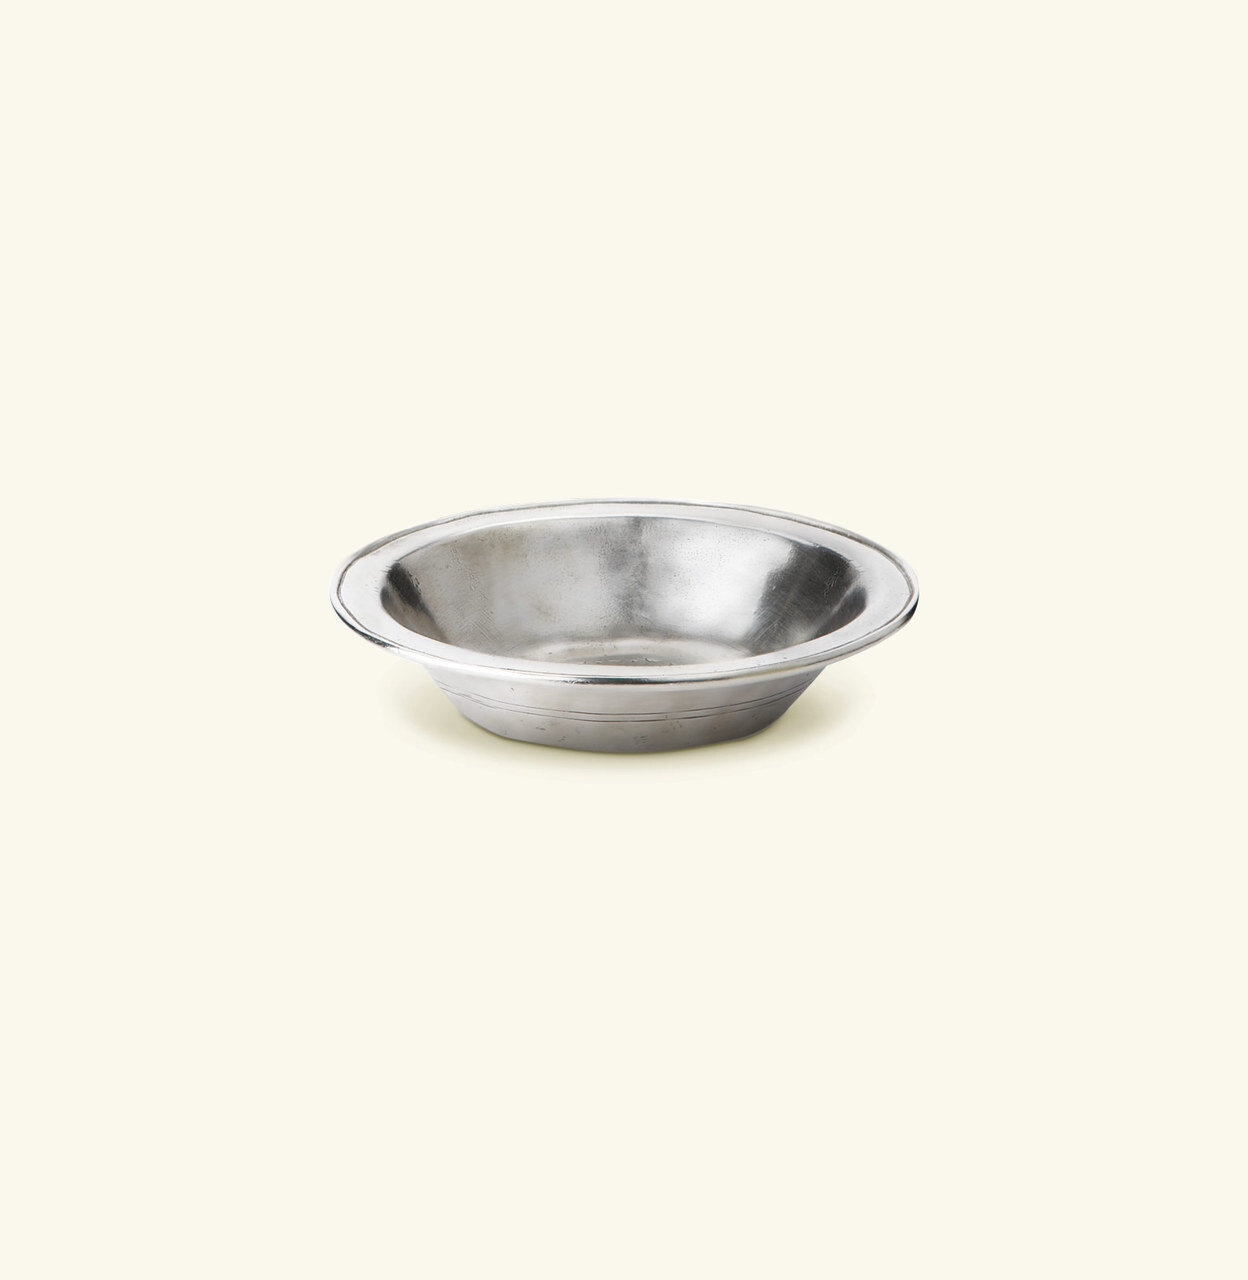 Match Pewter Rimmed Bowl Small a296.0